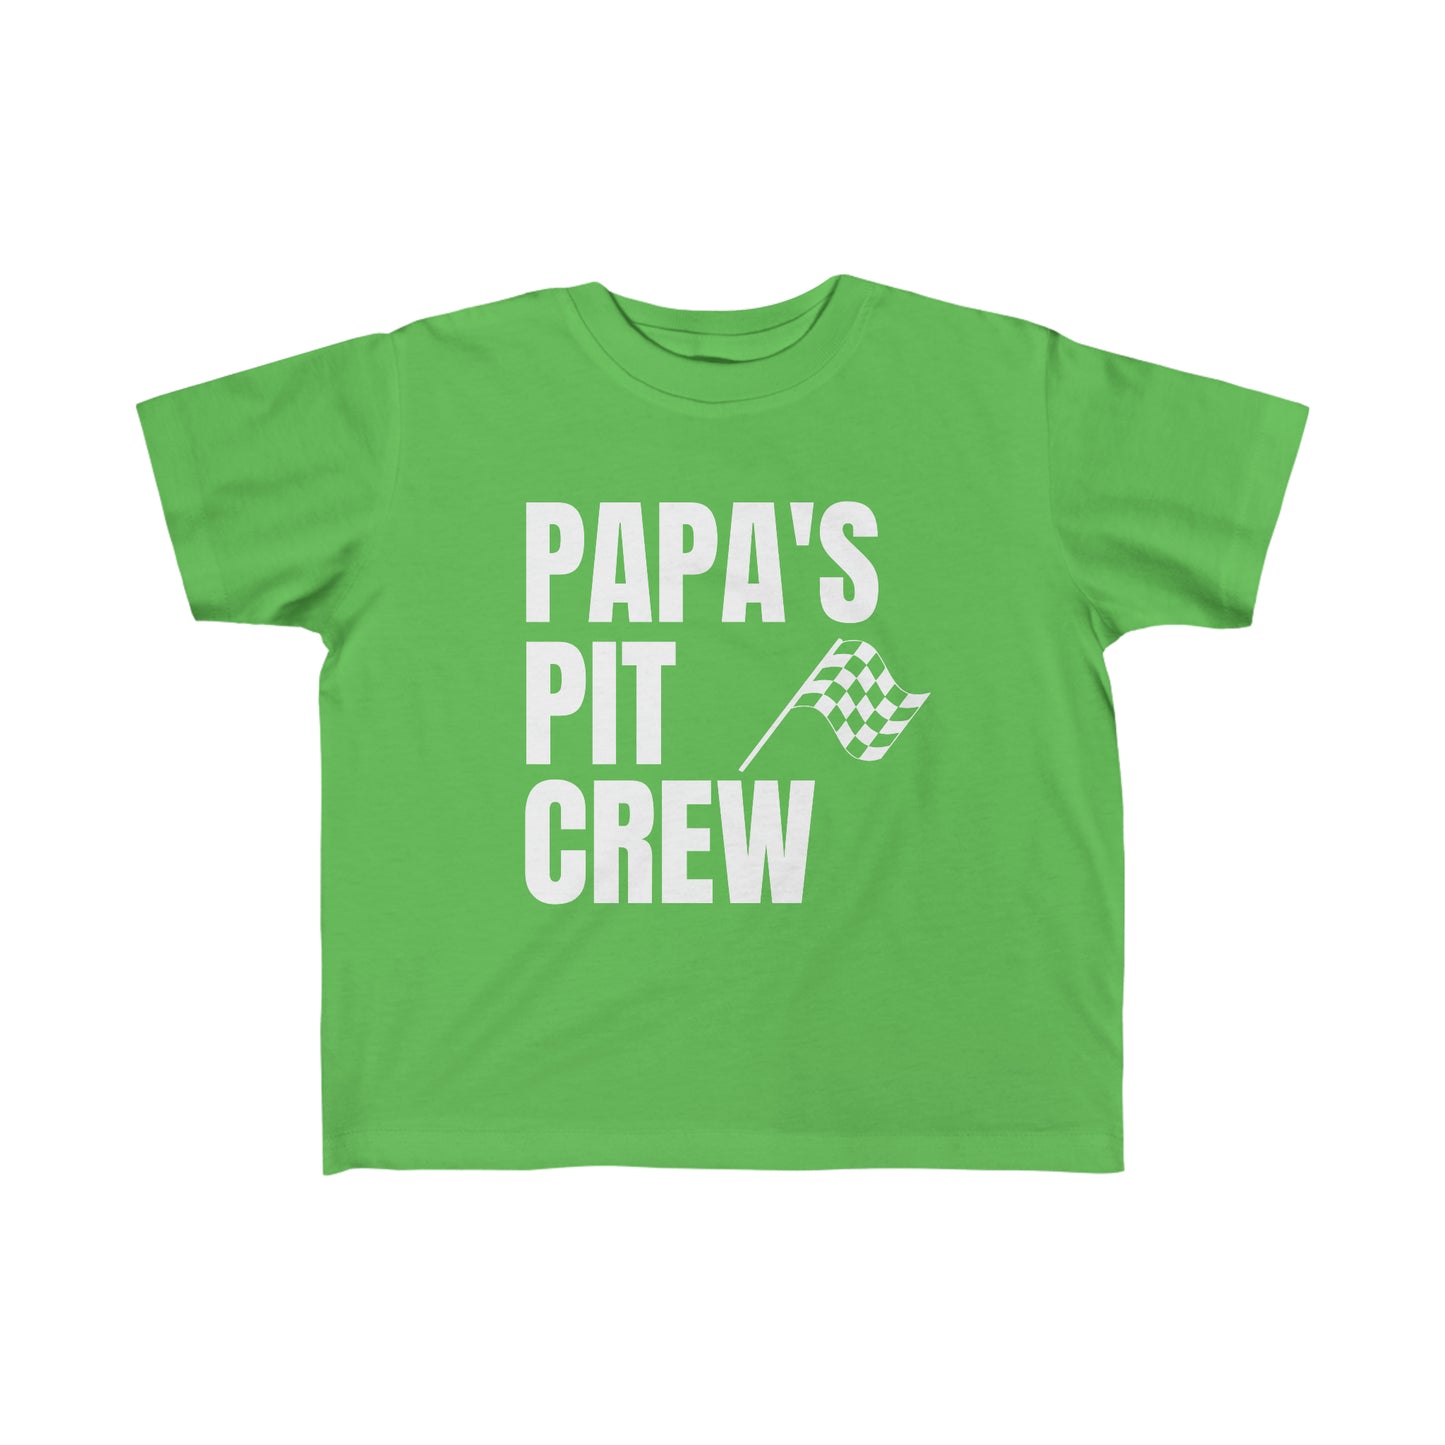 Papa's Pit Crew Toddler's Fine Jersey Tee